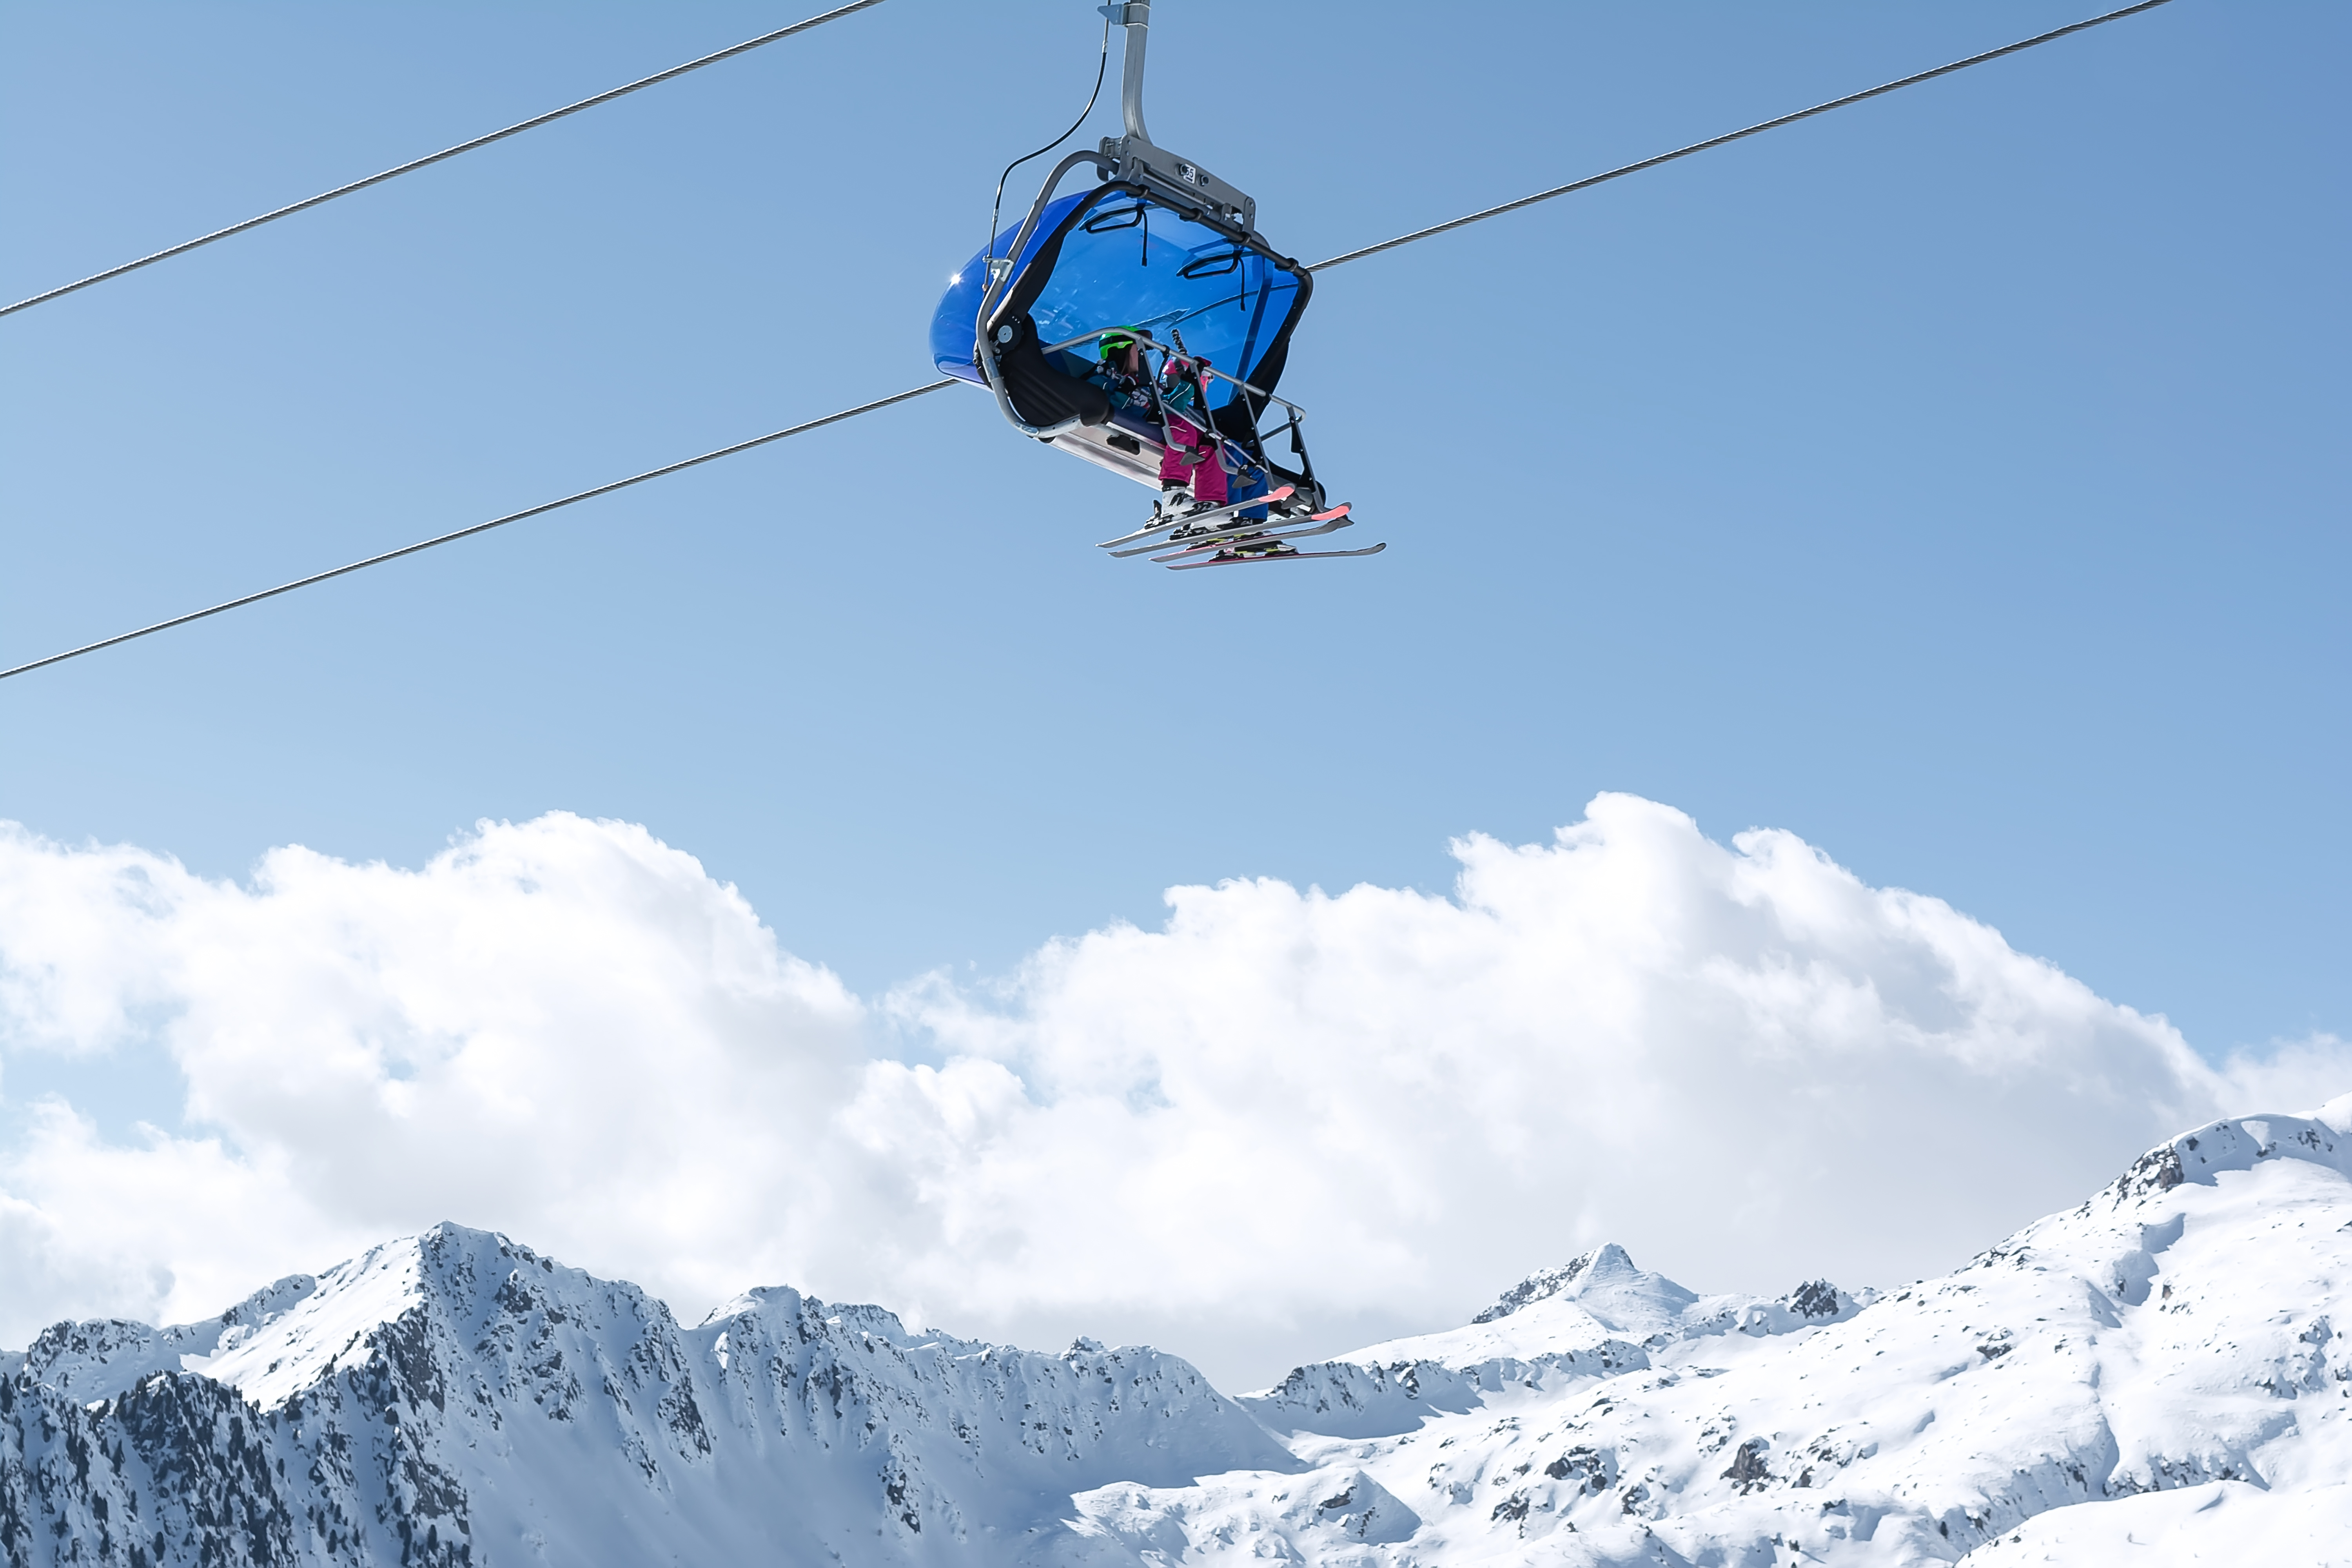 A view of the snow-capped mountains and the cable car with blue chair cabins in which children ride